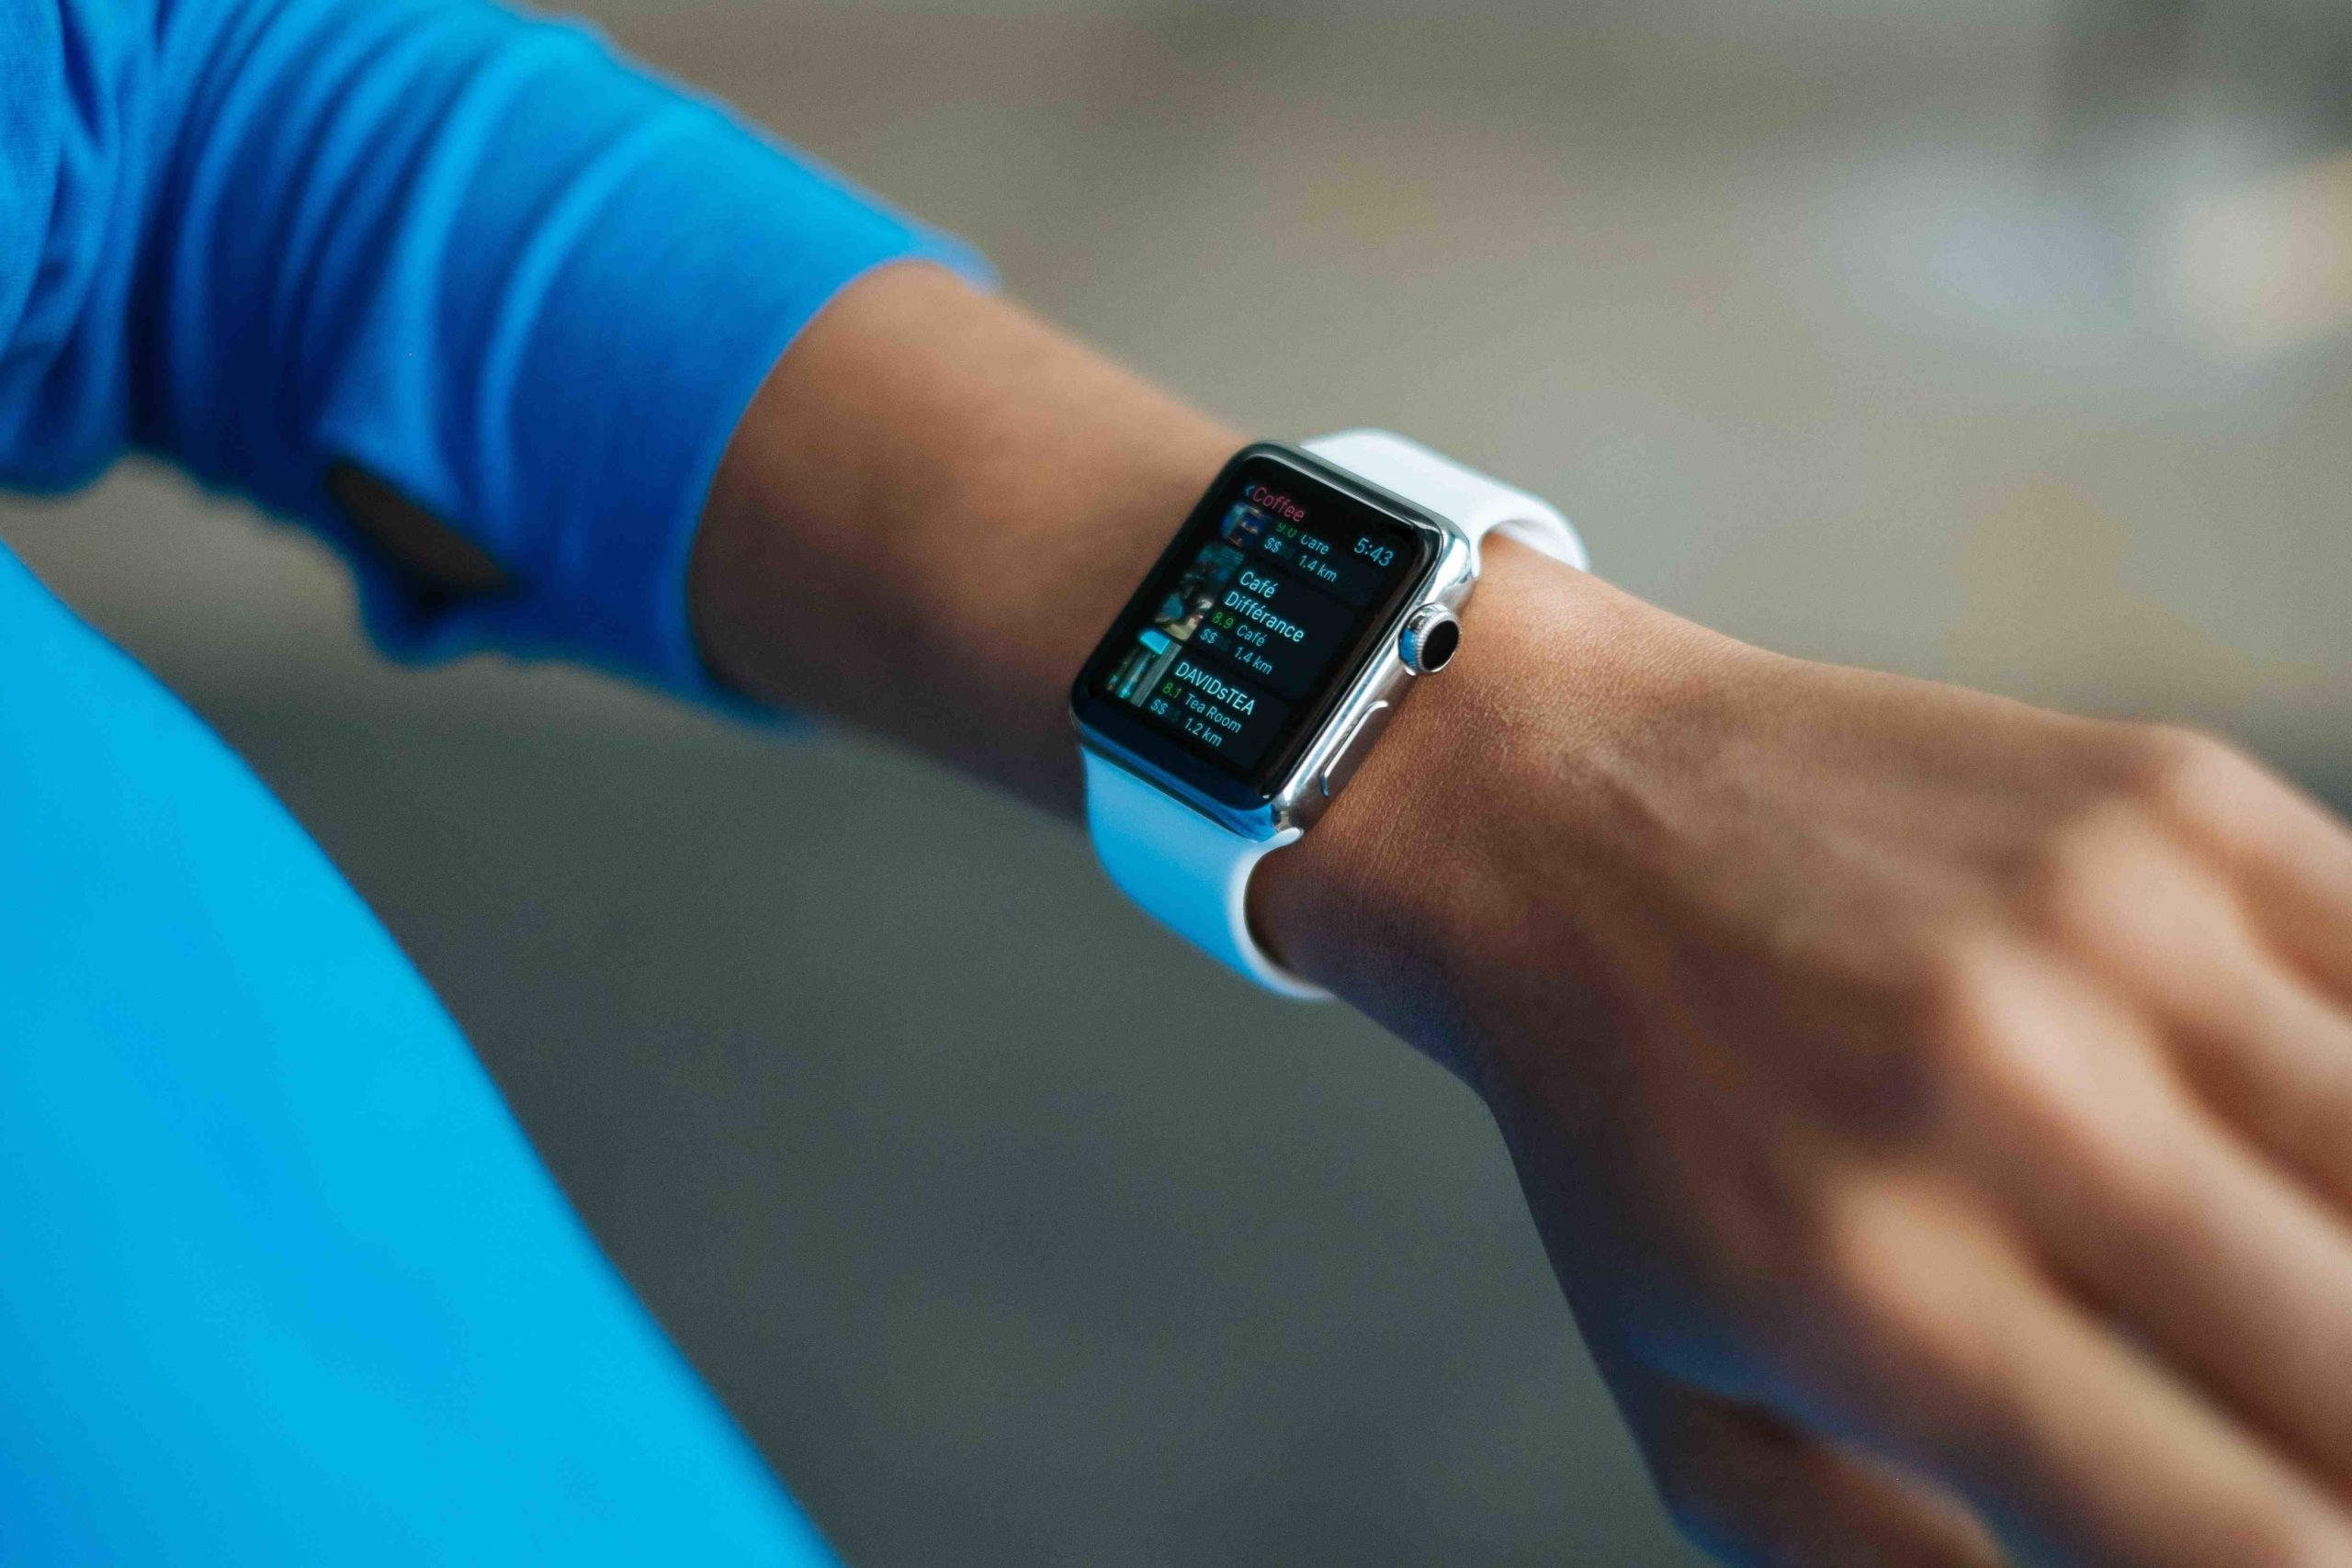 Do you have to pay to use Fitbit?